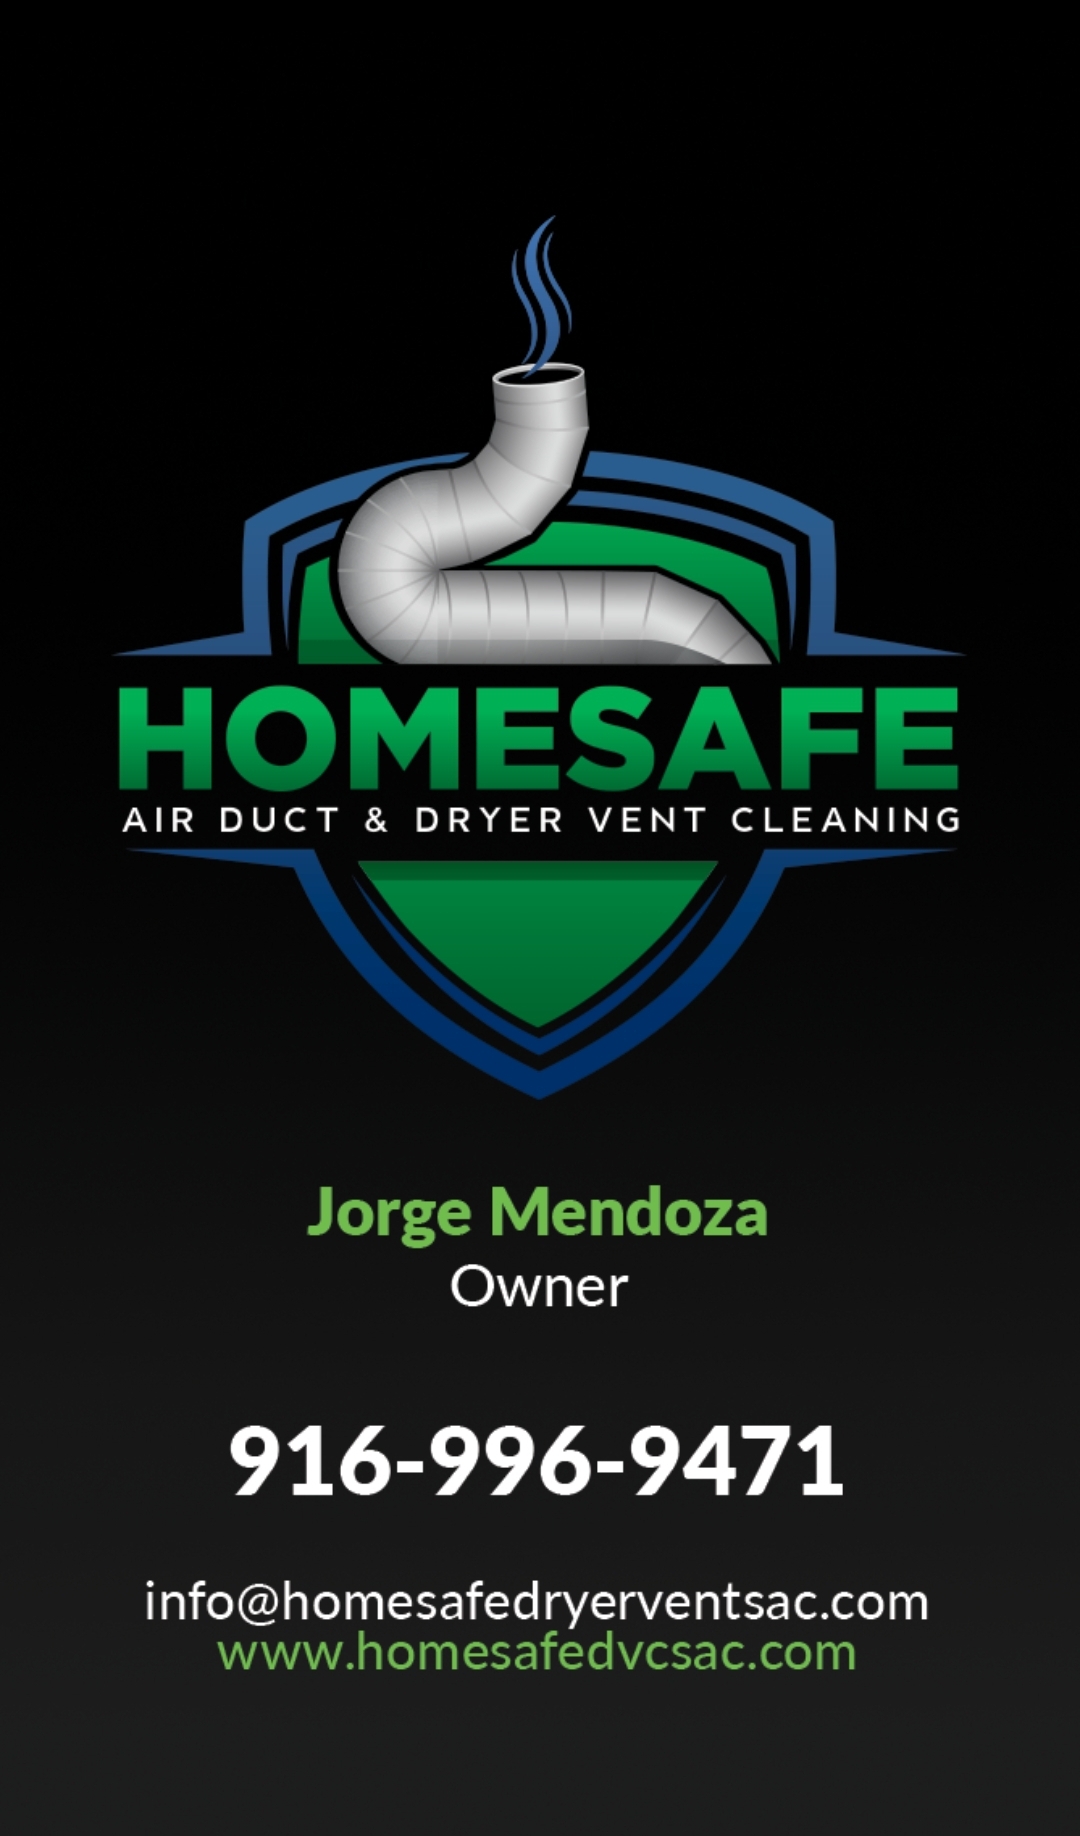 Home Safe Air Duct & Dryer Vent Cleaning LLC Logo